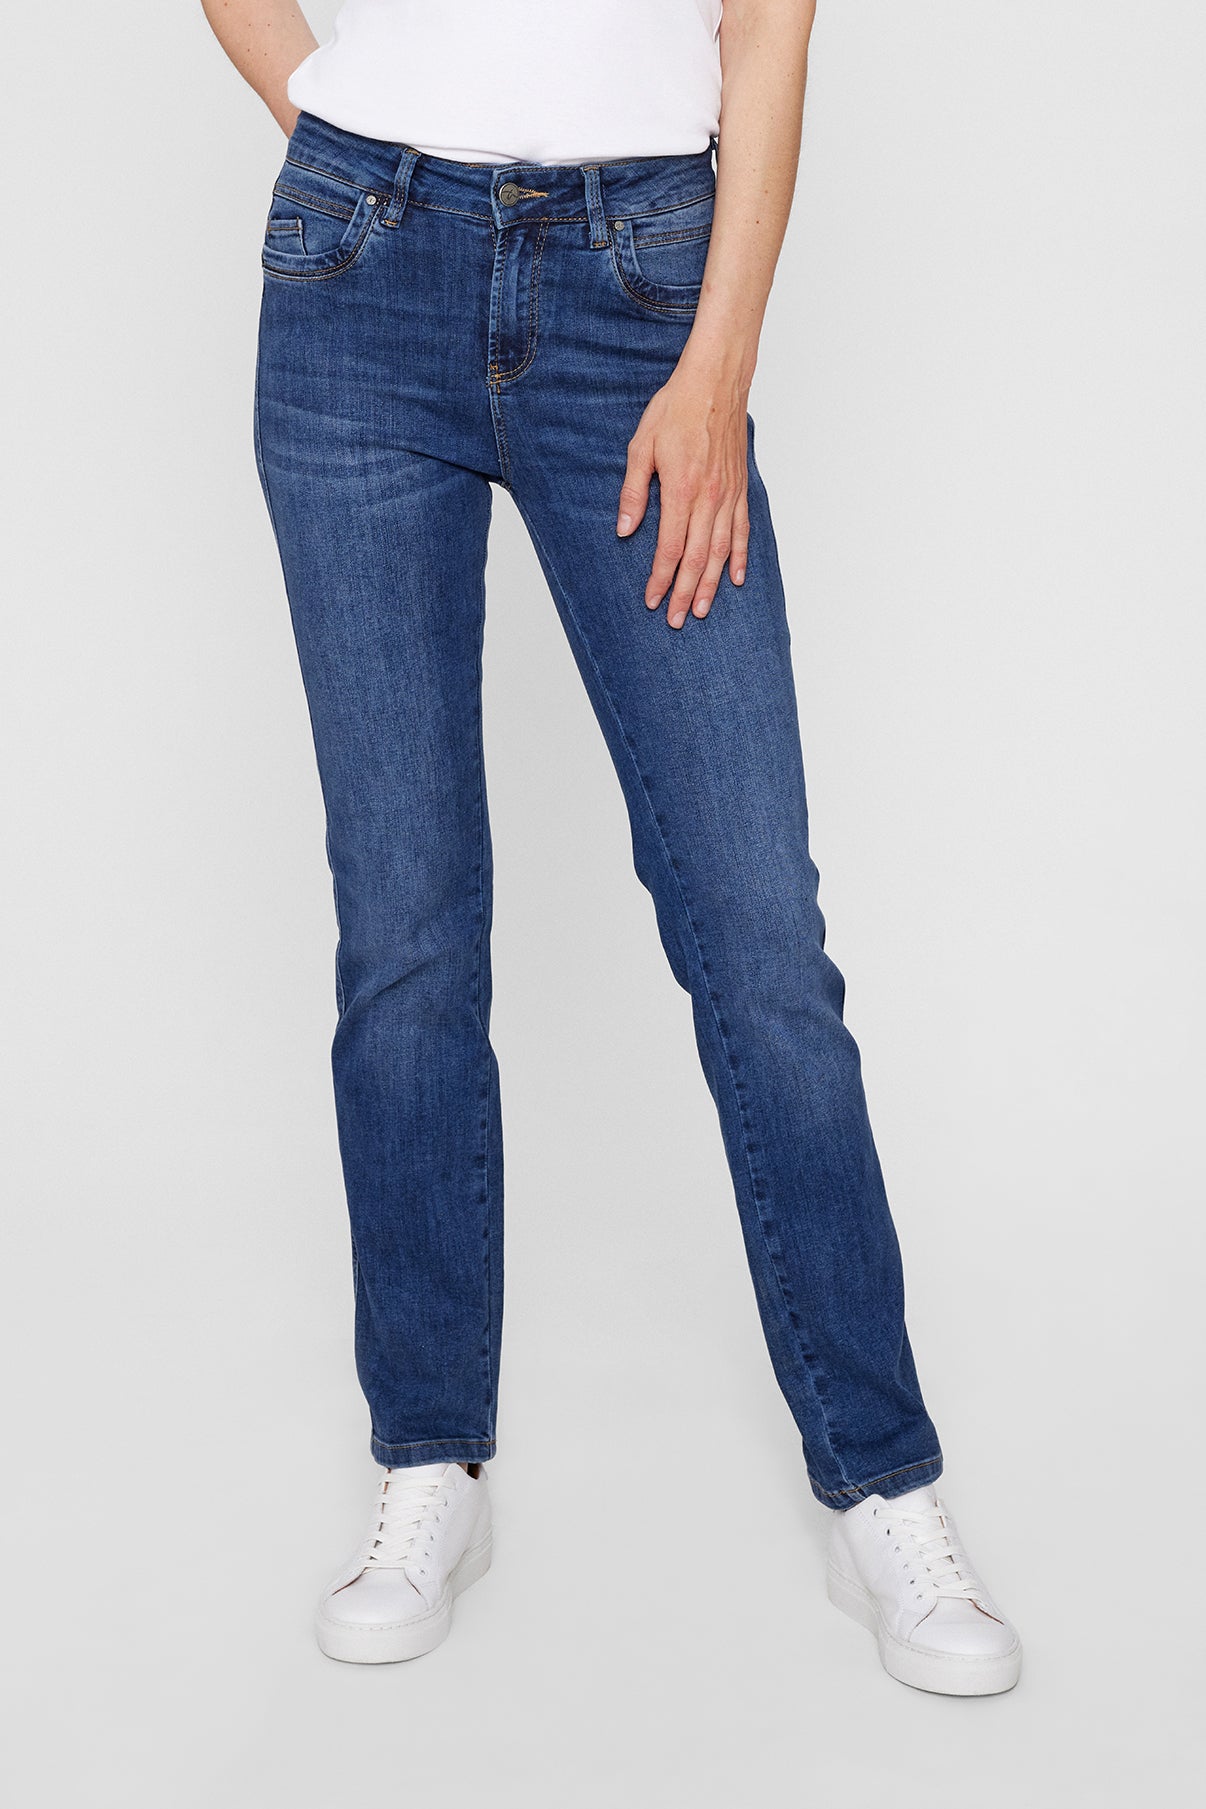 THERESE Jeans Maryann 9412